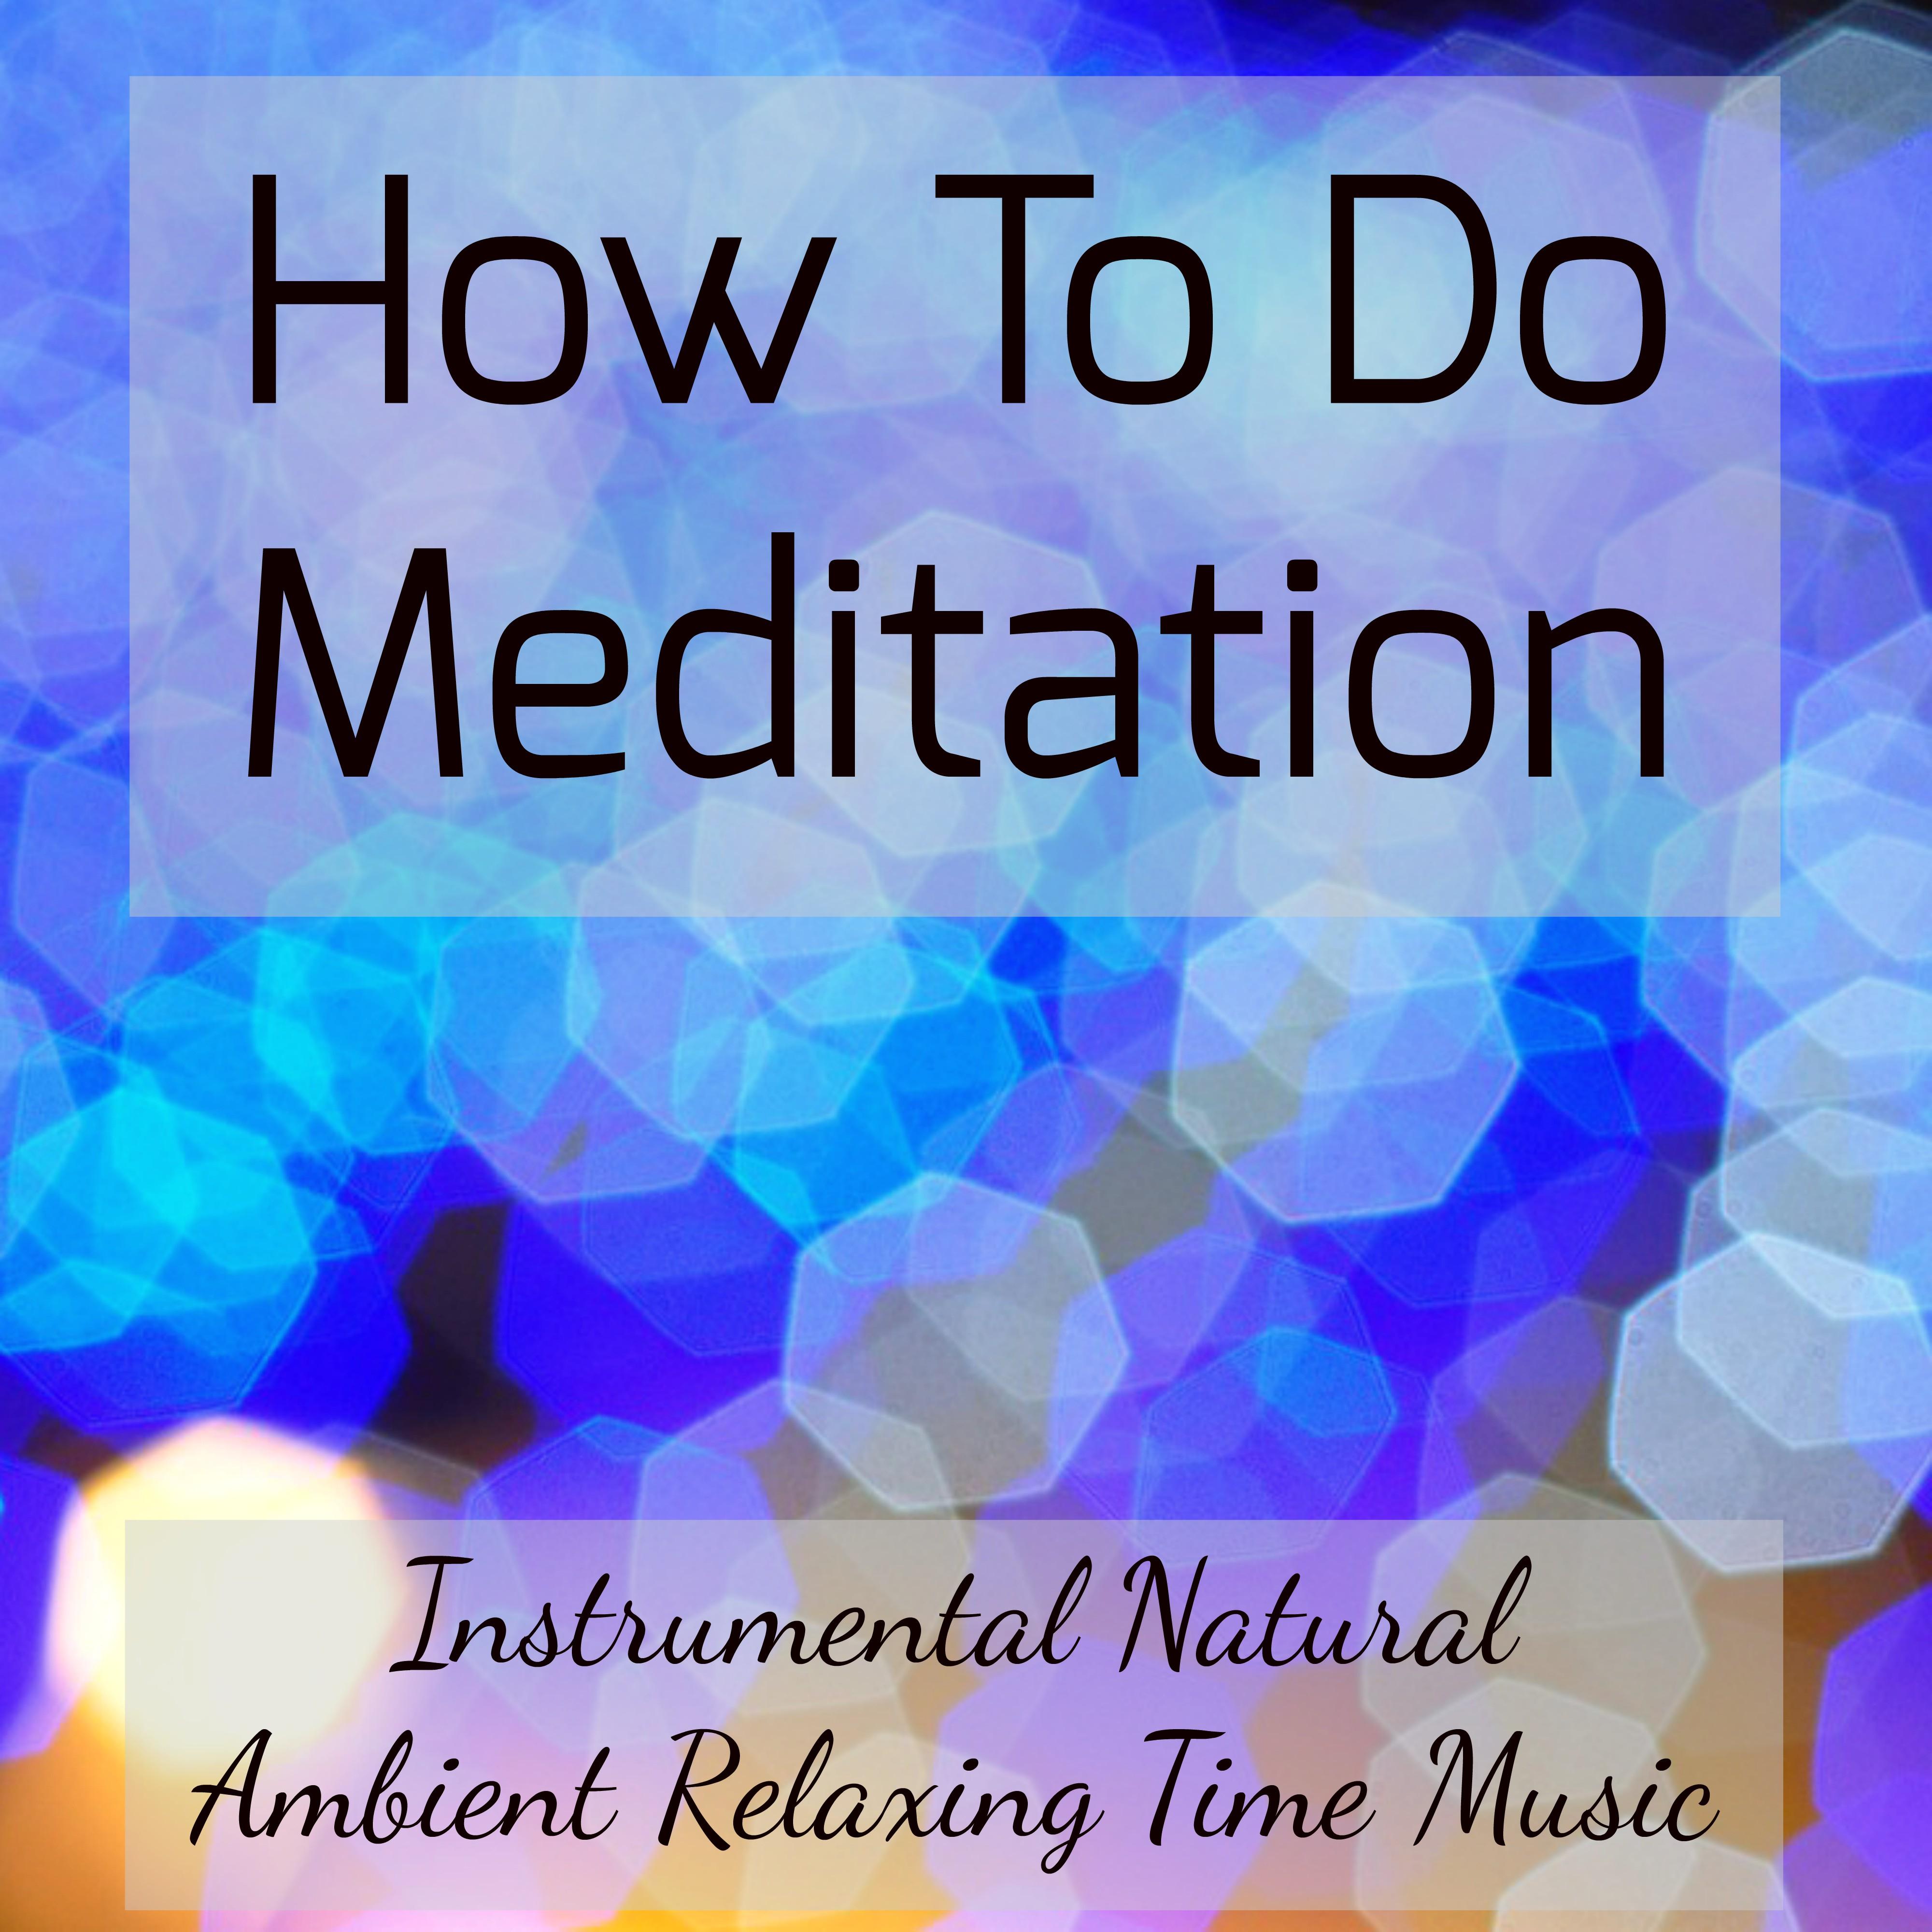 How To Do Meditation - Instrumental Natural Ambient Relaxing Time Music to Reduce Stress Healing Therapy Binaural Meditation